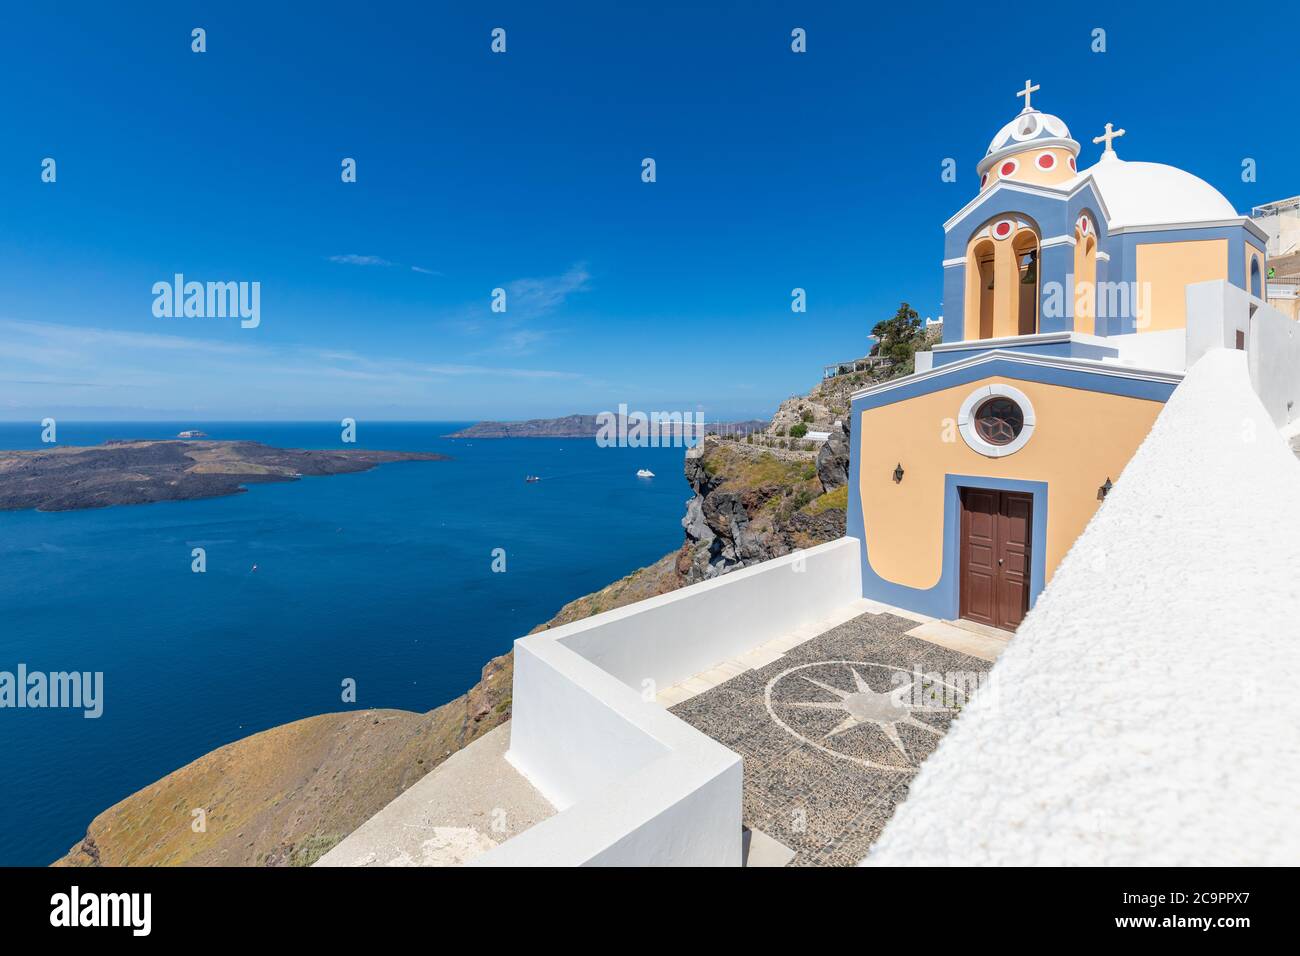 Sunny travel landscape, belltower of a church with a view of Santorini volcanic caldera and ships in it, Santorini, Cyclades, Greece Stock Photo